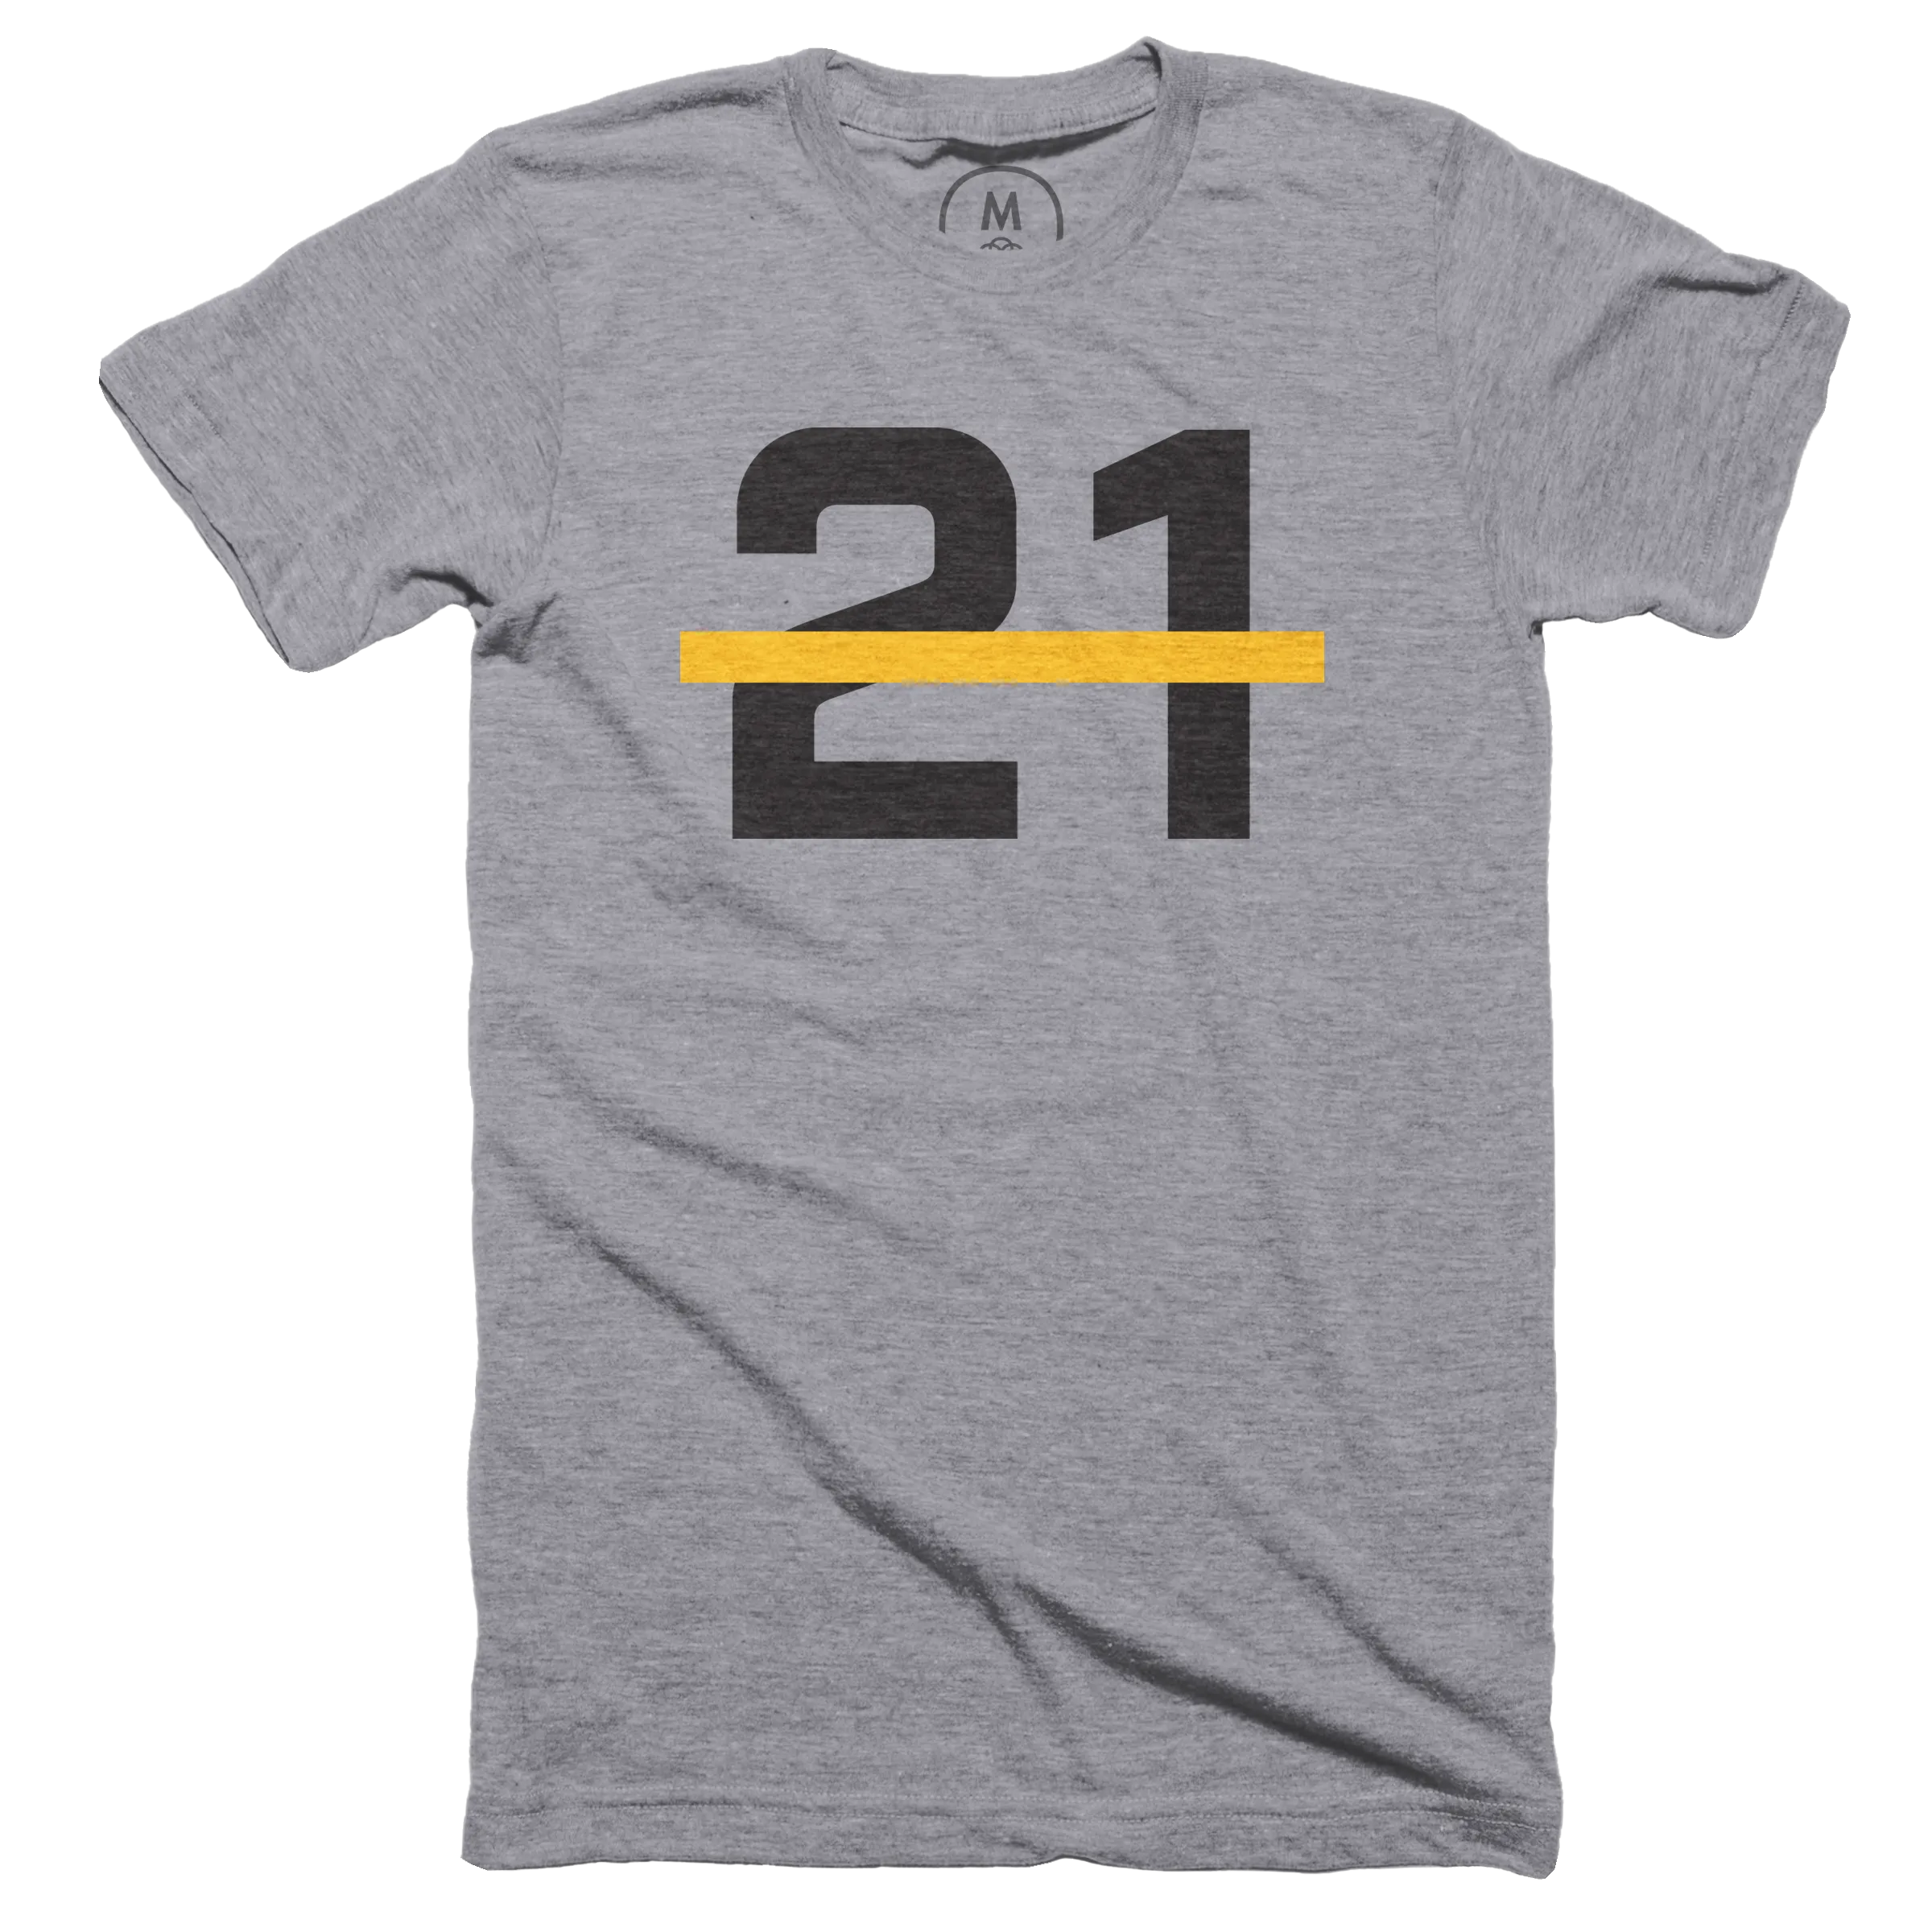 FREE shipping Number 21 Roberto Clemente The Great One shirt